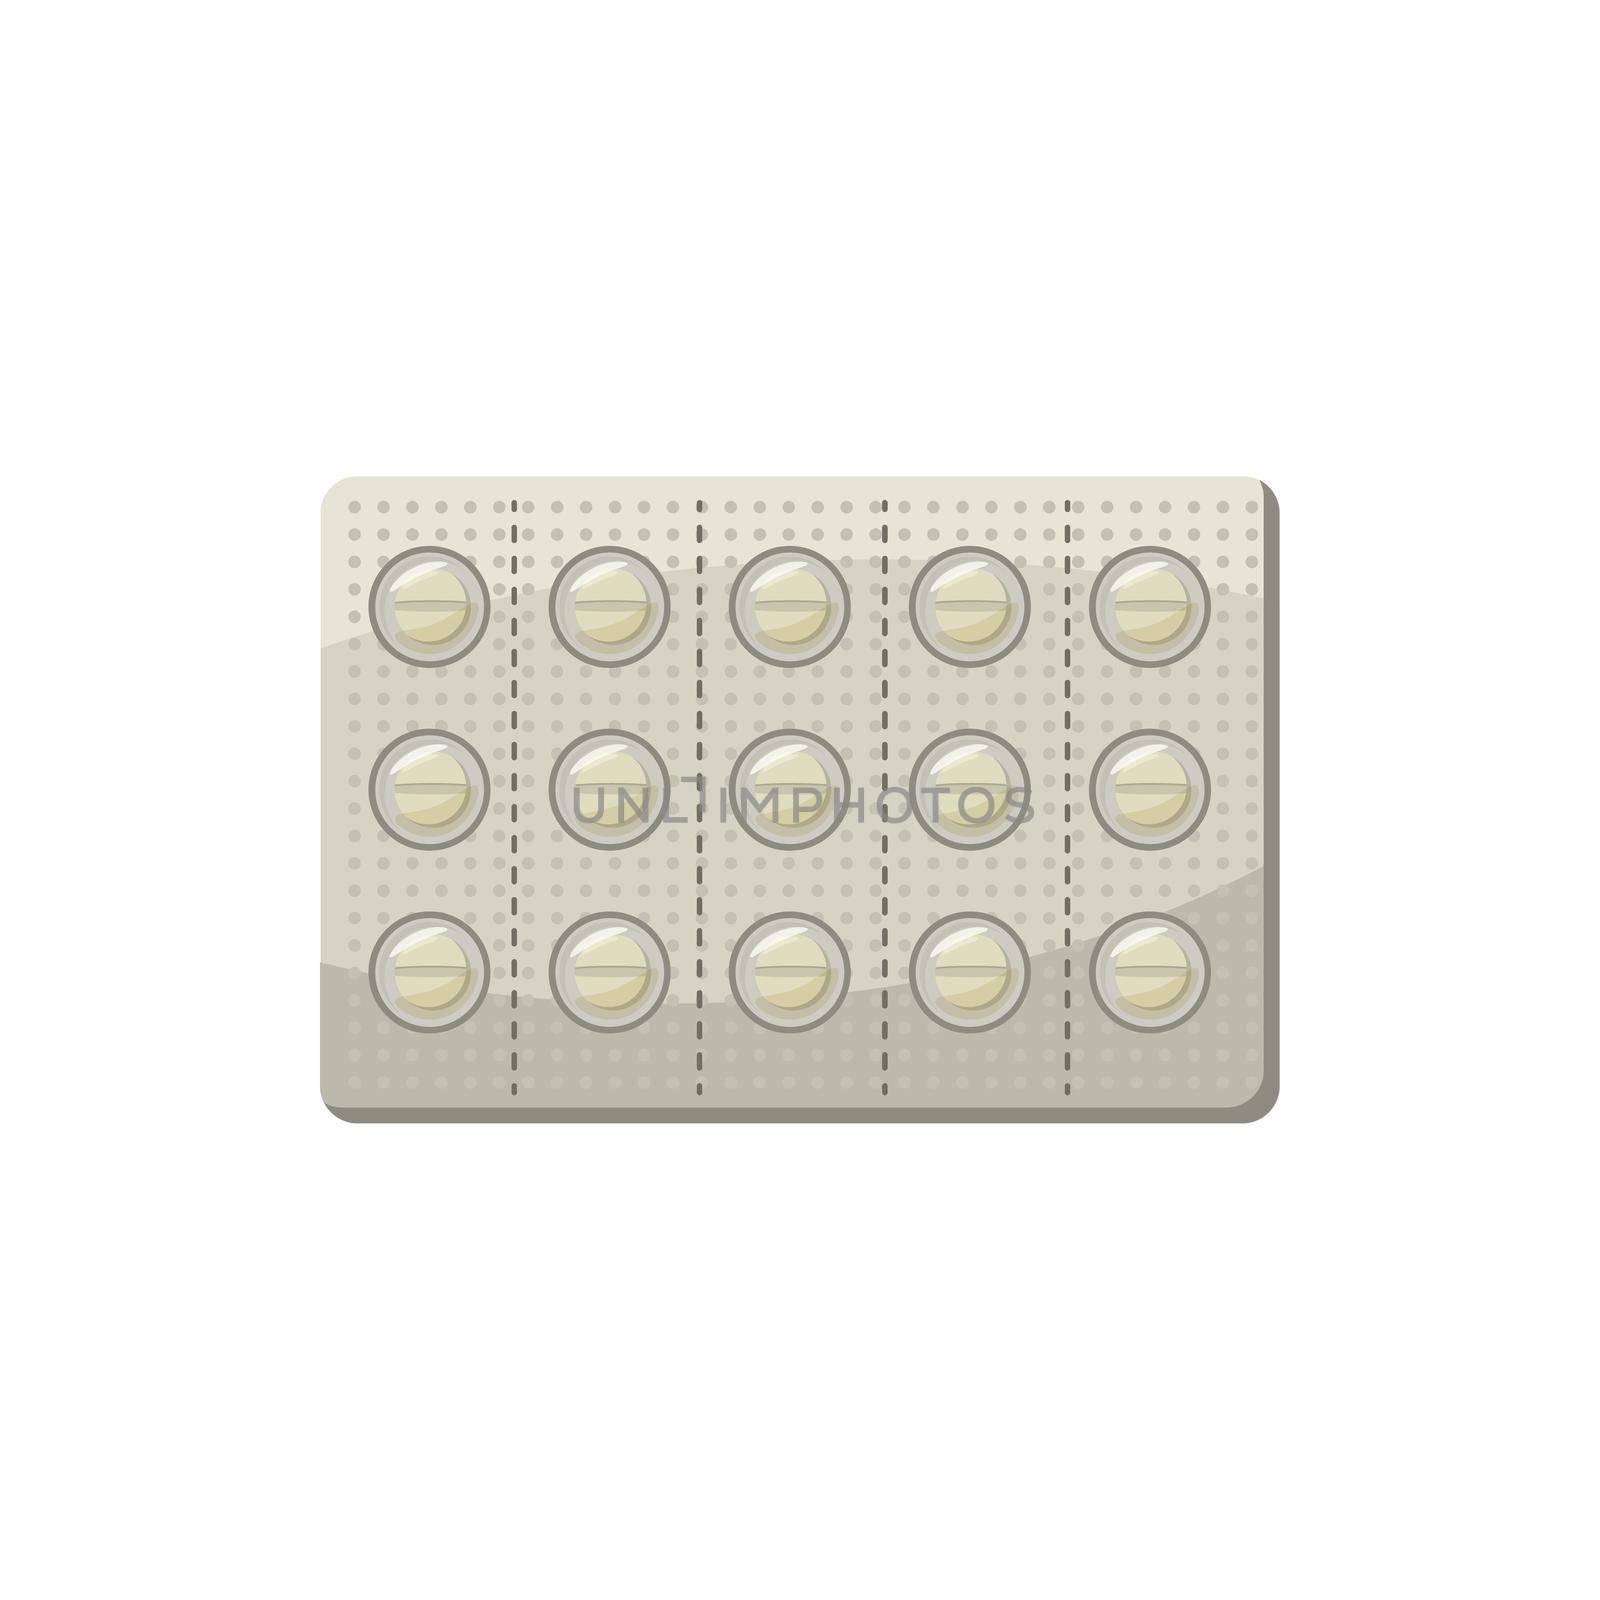 Round pills in a blister pack icon in cartoon style on a white background